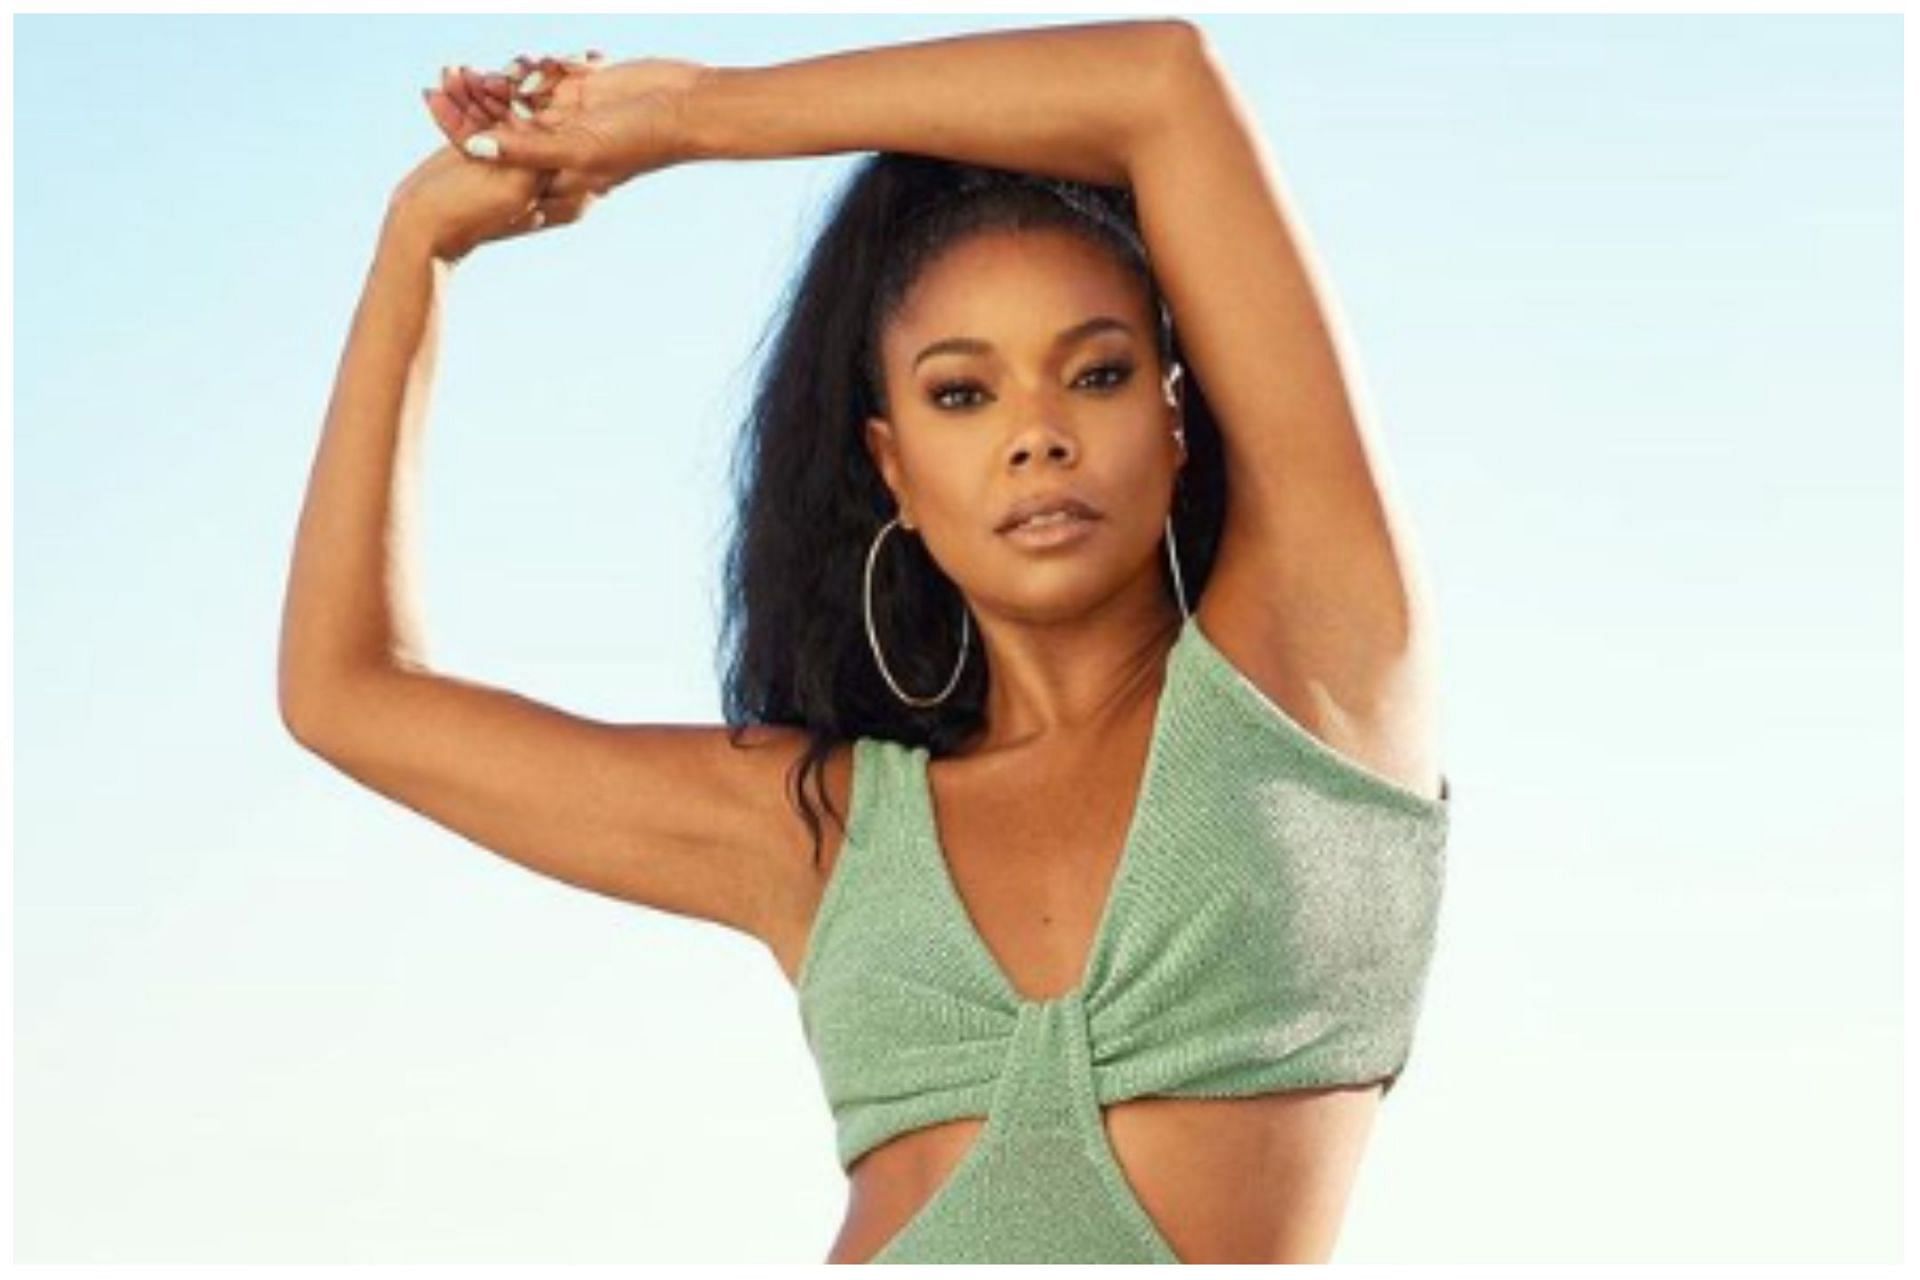 Gabrielle Union Shares the Exercises That Help Her Stay in Shape